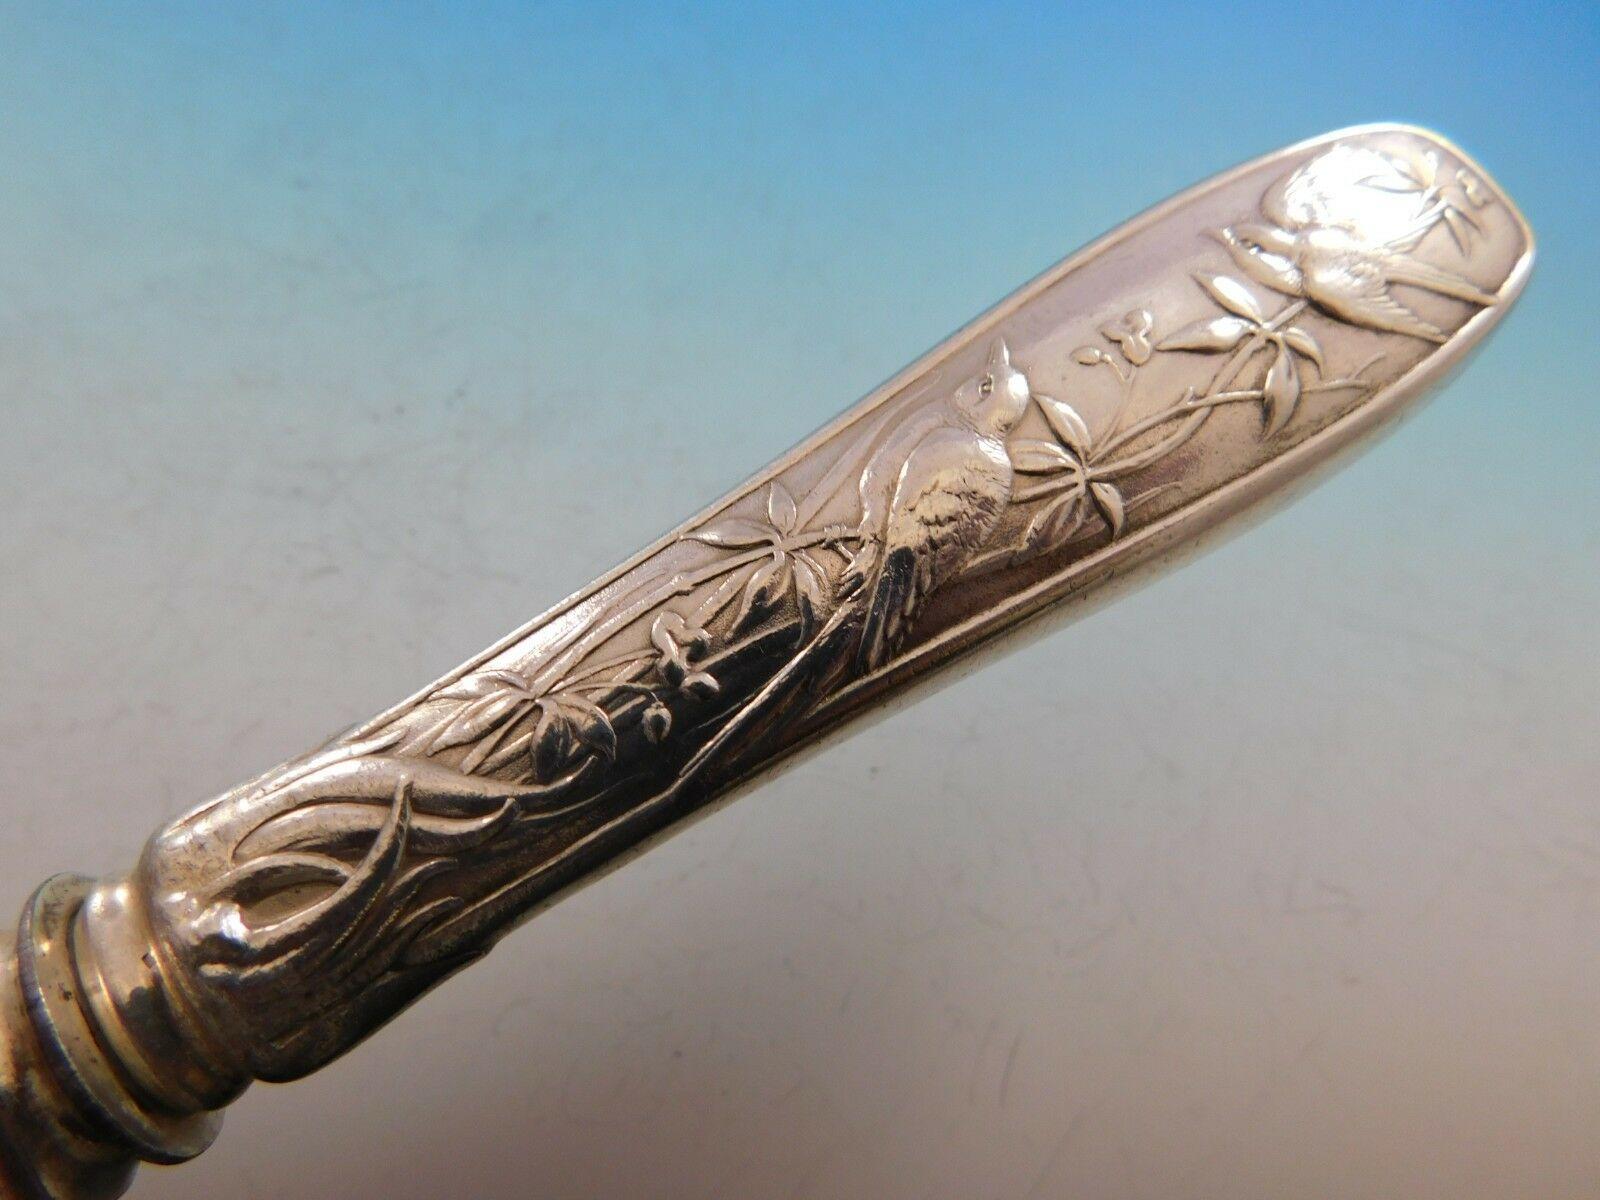 Japanese was designed in 1871, during the most innovative period in the history of Tiffany silver, and it is still one of the most popular of all Tiffany patterns. Japanese was the first Tiffany pattern to introduce silver decorated in the Japanese